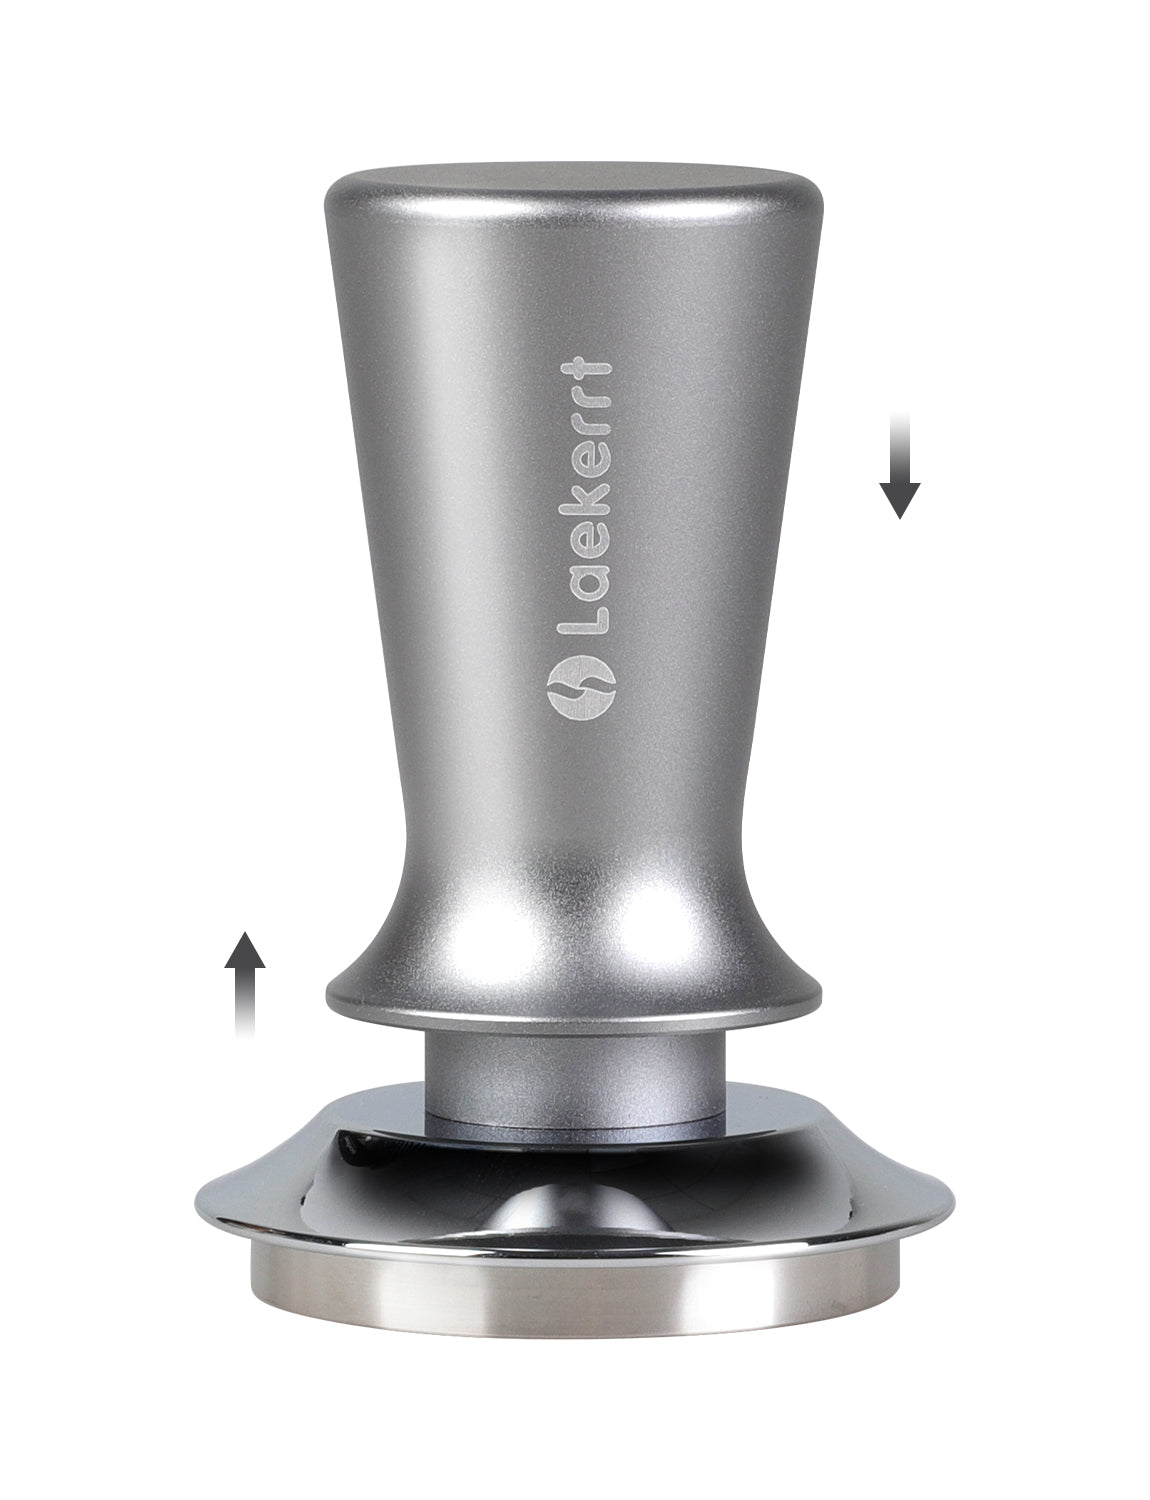 51mm Coffee Tamper With Tamper Mat, Espresso Tamper 51mm With 304 Stainless  Steel Flat Base, Coffee Tamper 51mm With Wooden Handle For Espresso Machi